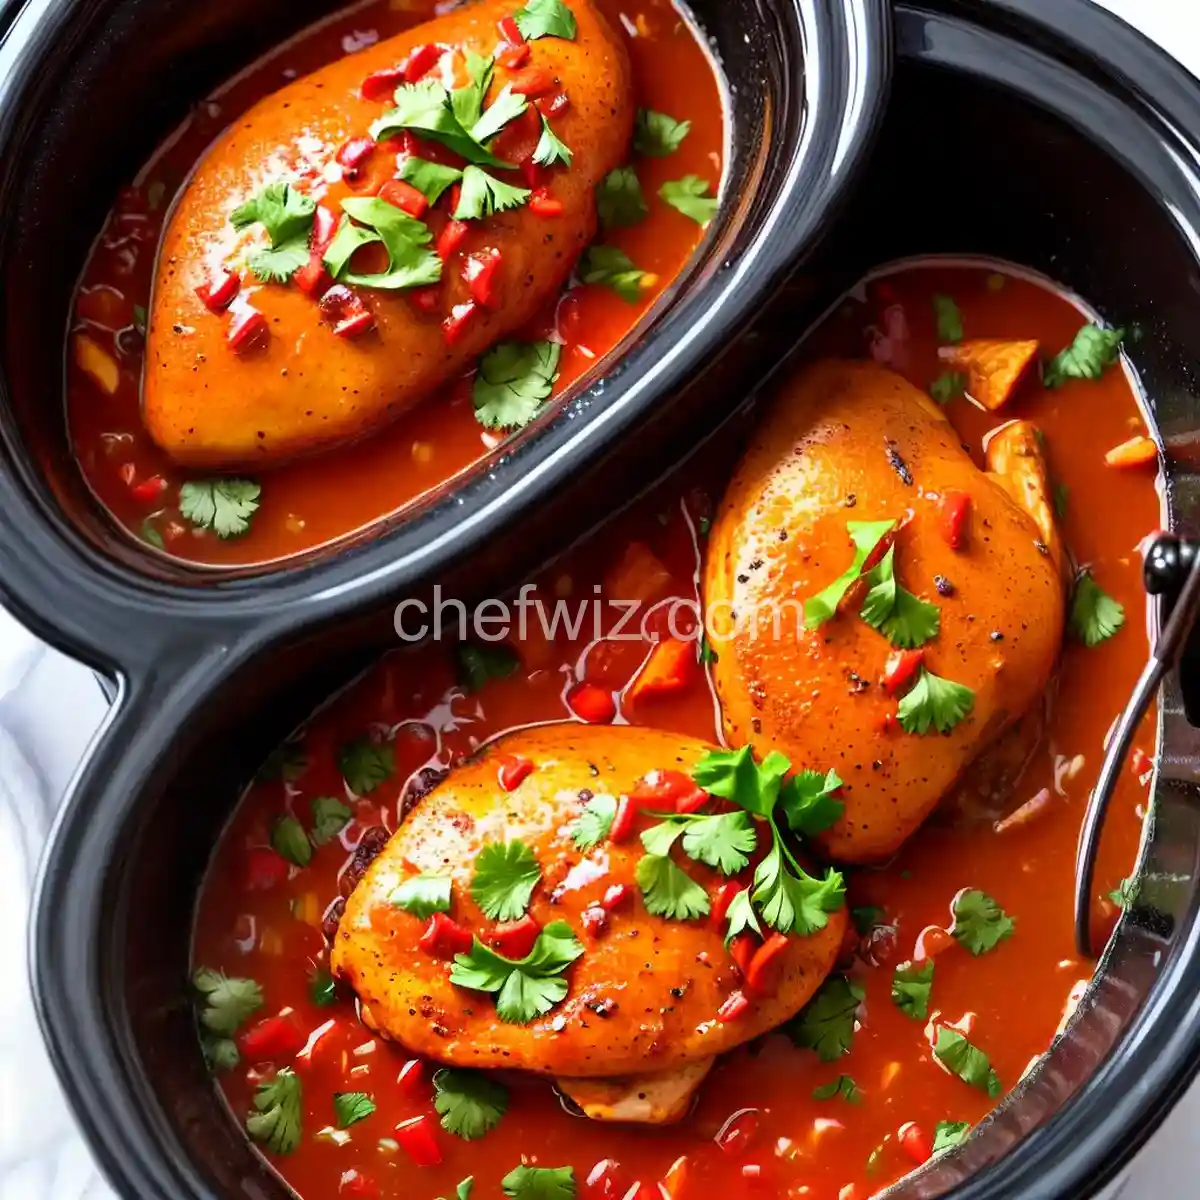 Slow Cooker Spicy Chicken compressed image1